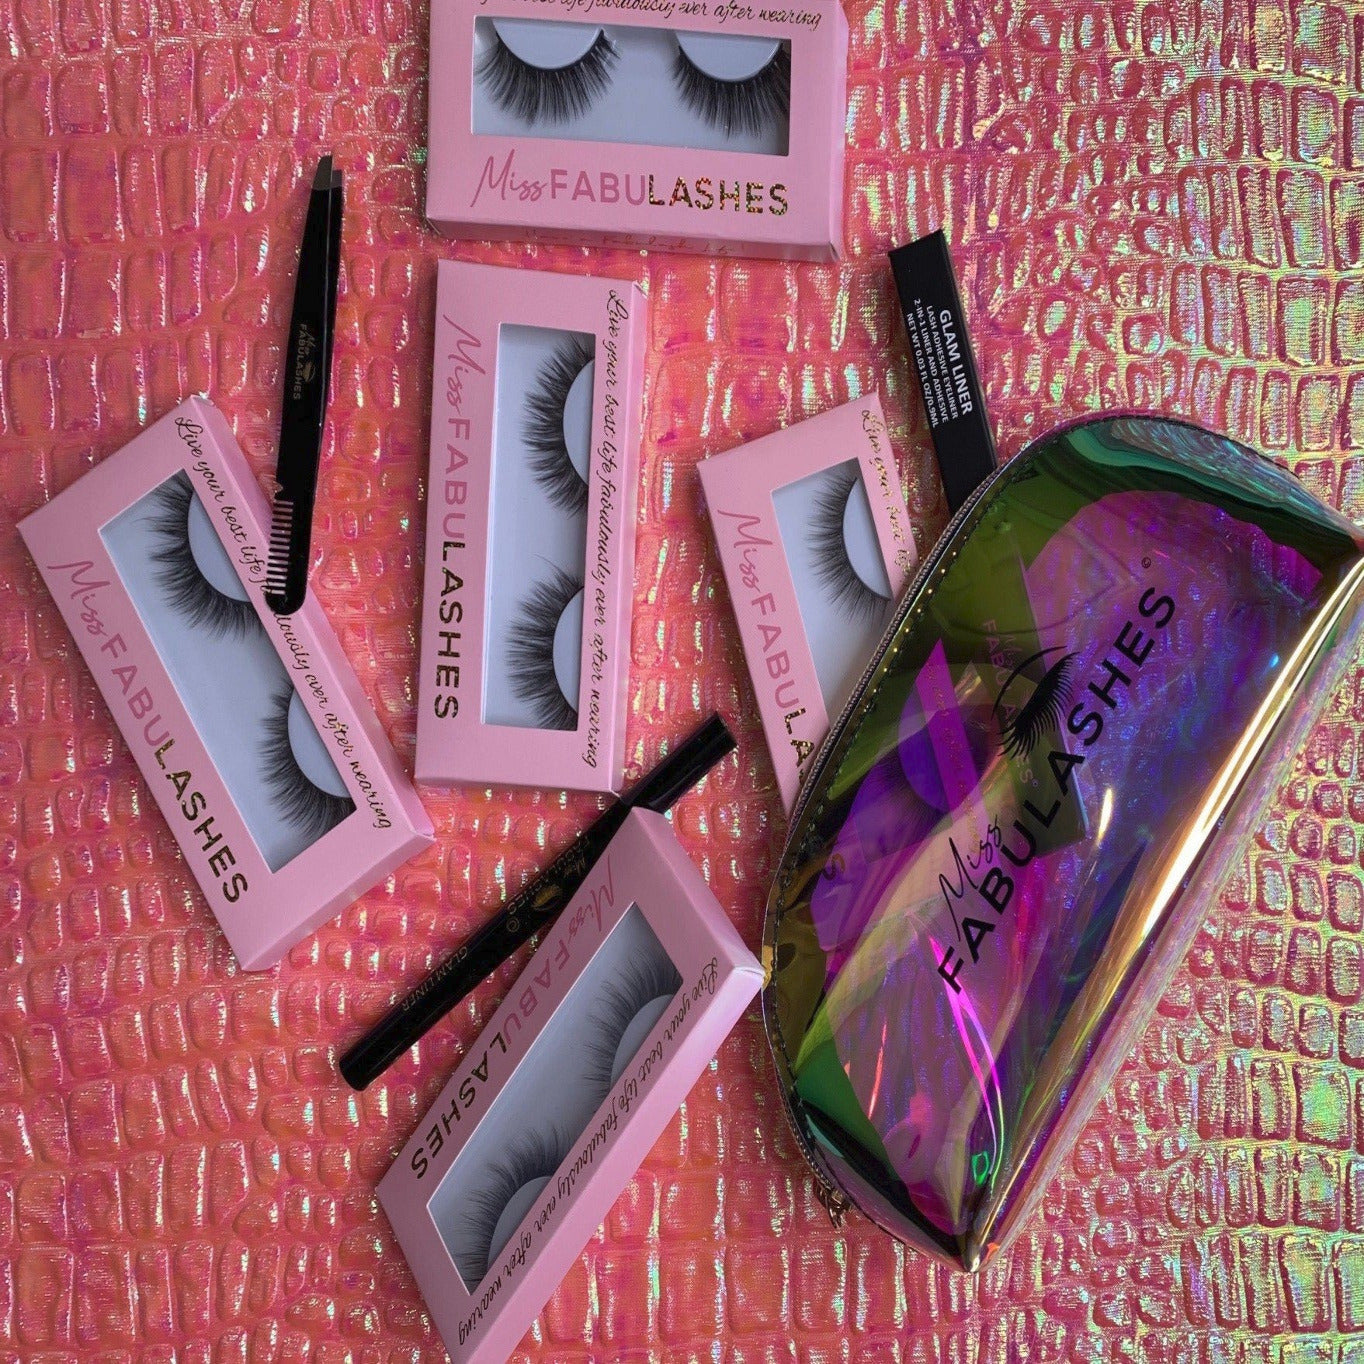 Reign Supreme Best Magnetic Lashes and Liner Kit - Miss Fabulashes